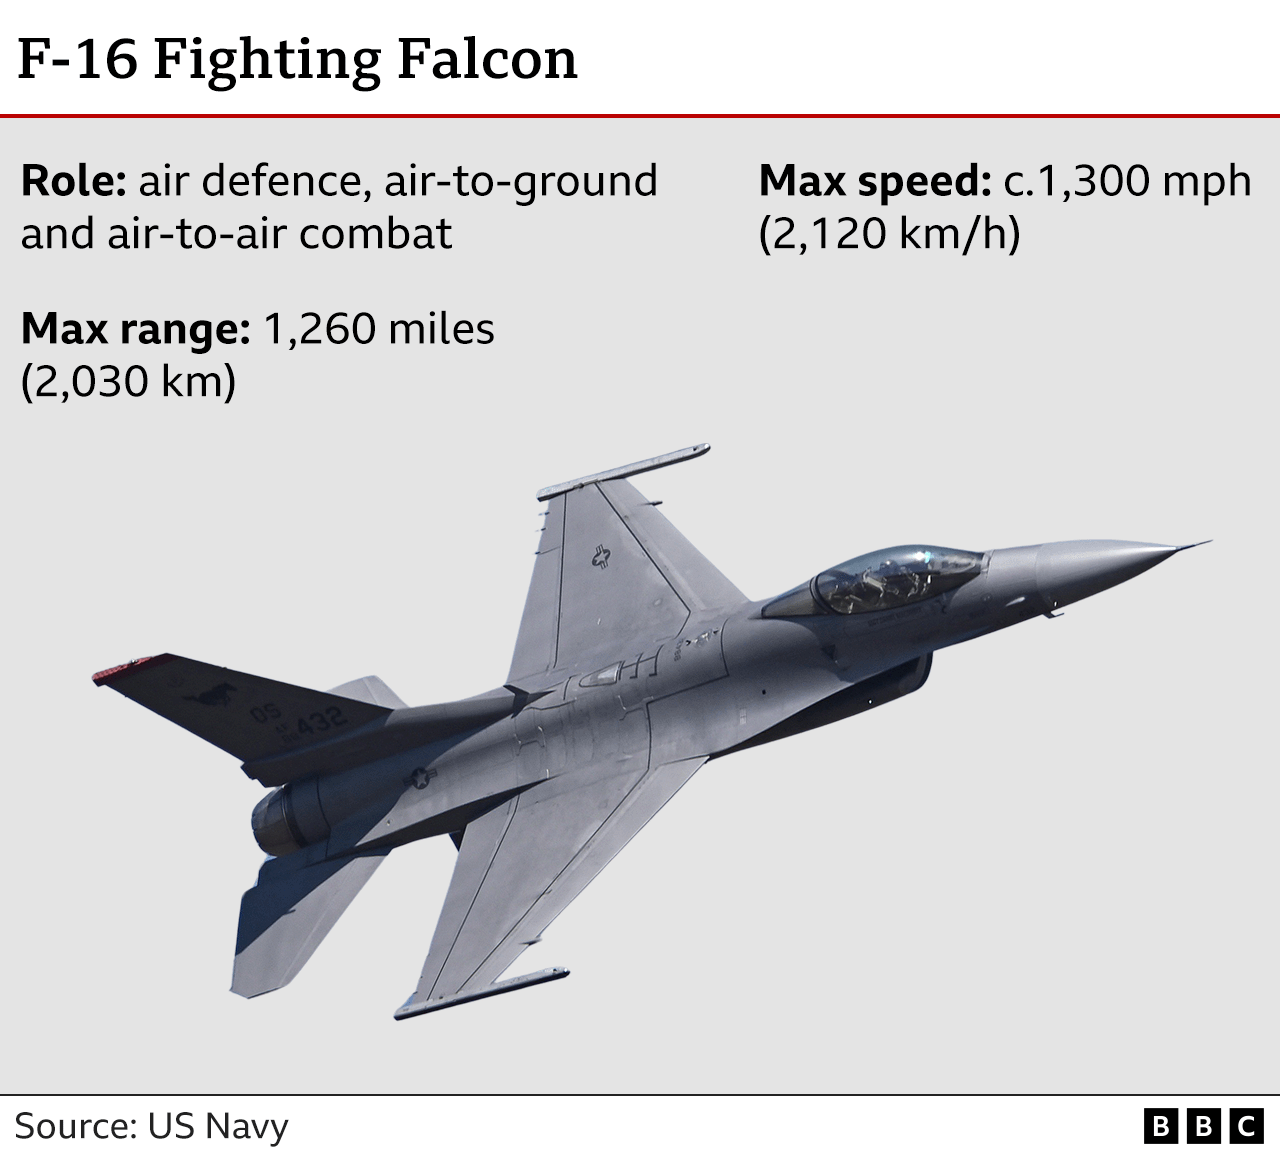 Infographic on F-16 Fighting Falcon